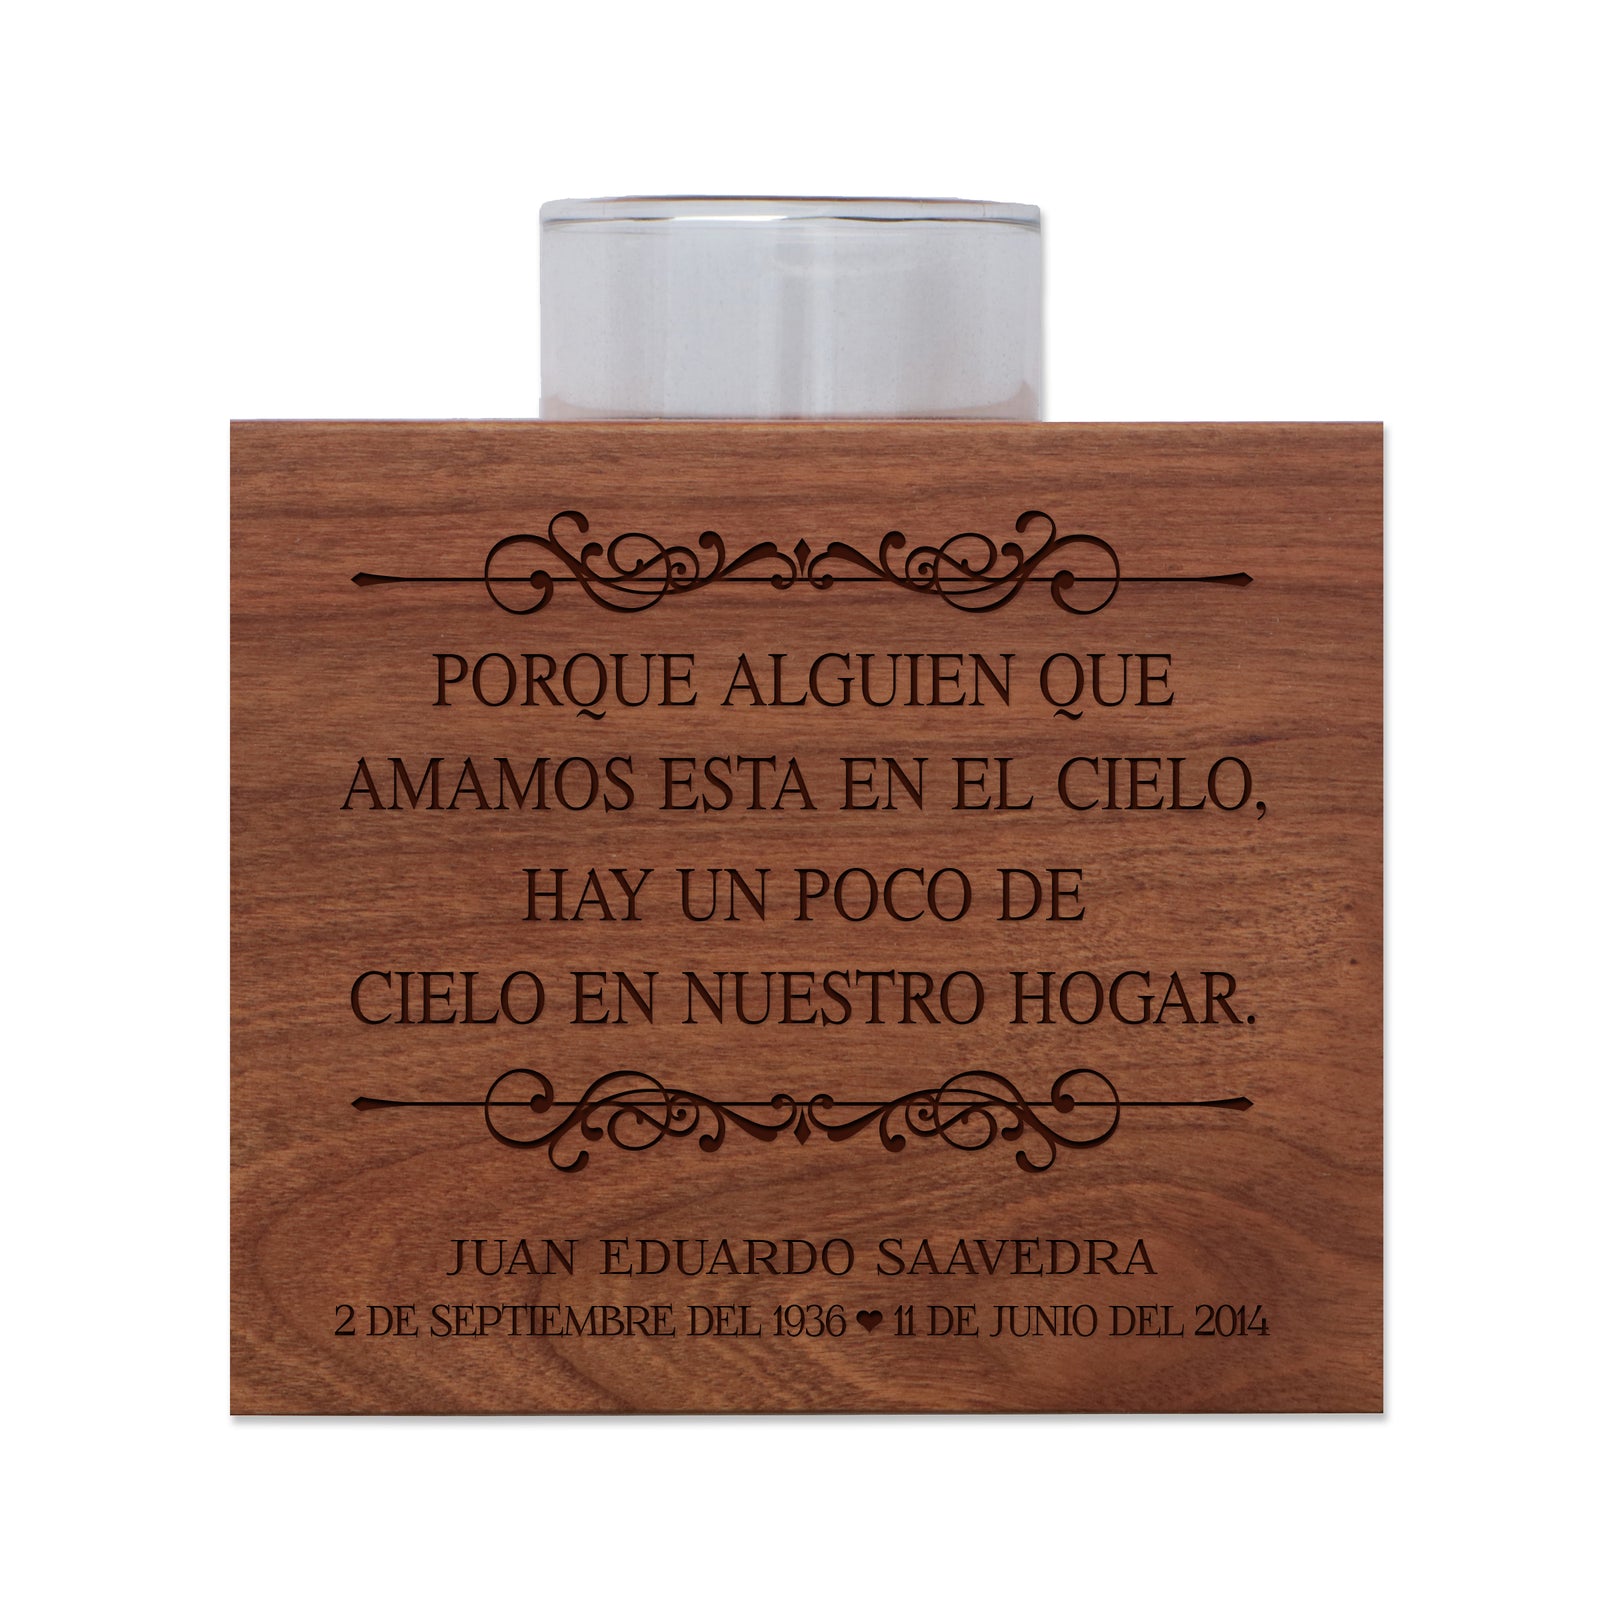 Lifesong Milestones Custom Engraved Cherry Wood Memorial Candle Holder in Spanish Verse 3” (W) x 2.75” (D) x 3.5” (H) Great memorial gift to HONOR the memory of a loved one who has passed on.